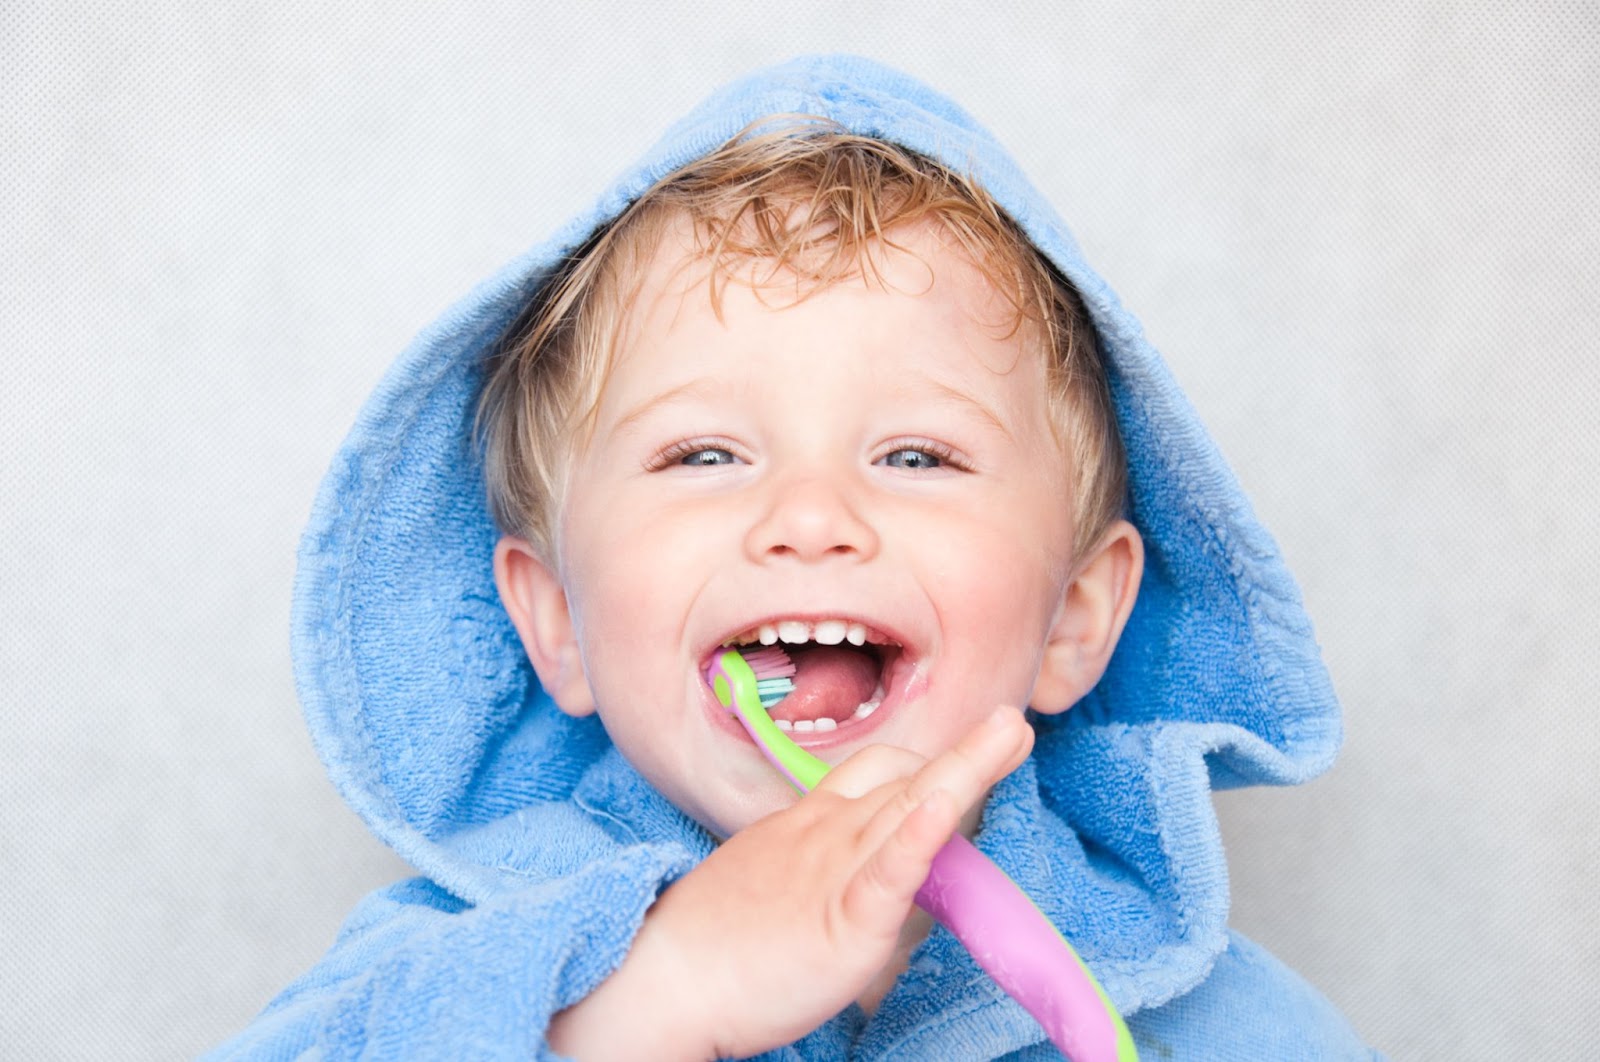 What To Do When Plaque Builds Up on Baby's Teeth